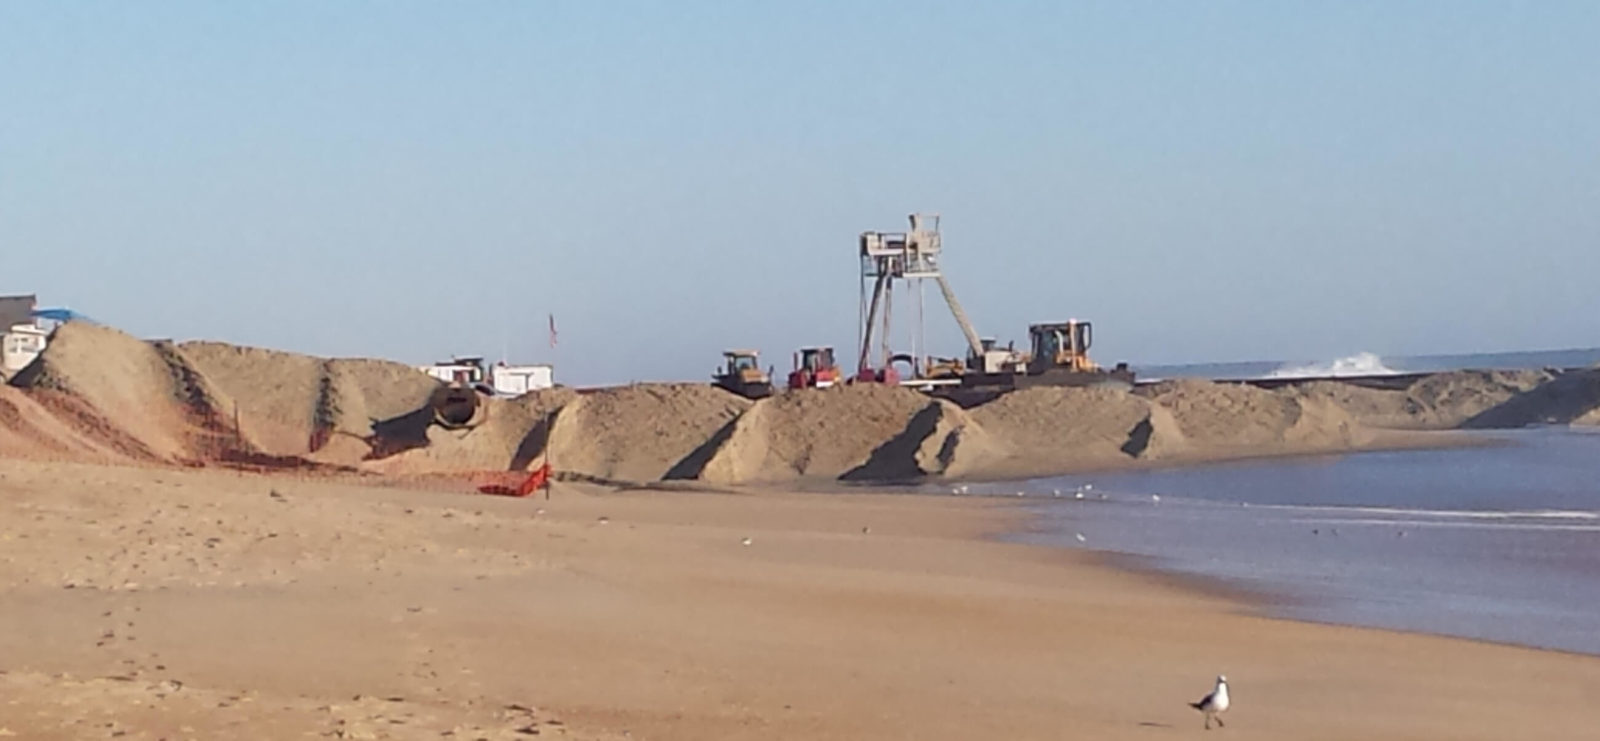 Bulldozers shaping the sand dunes